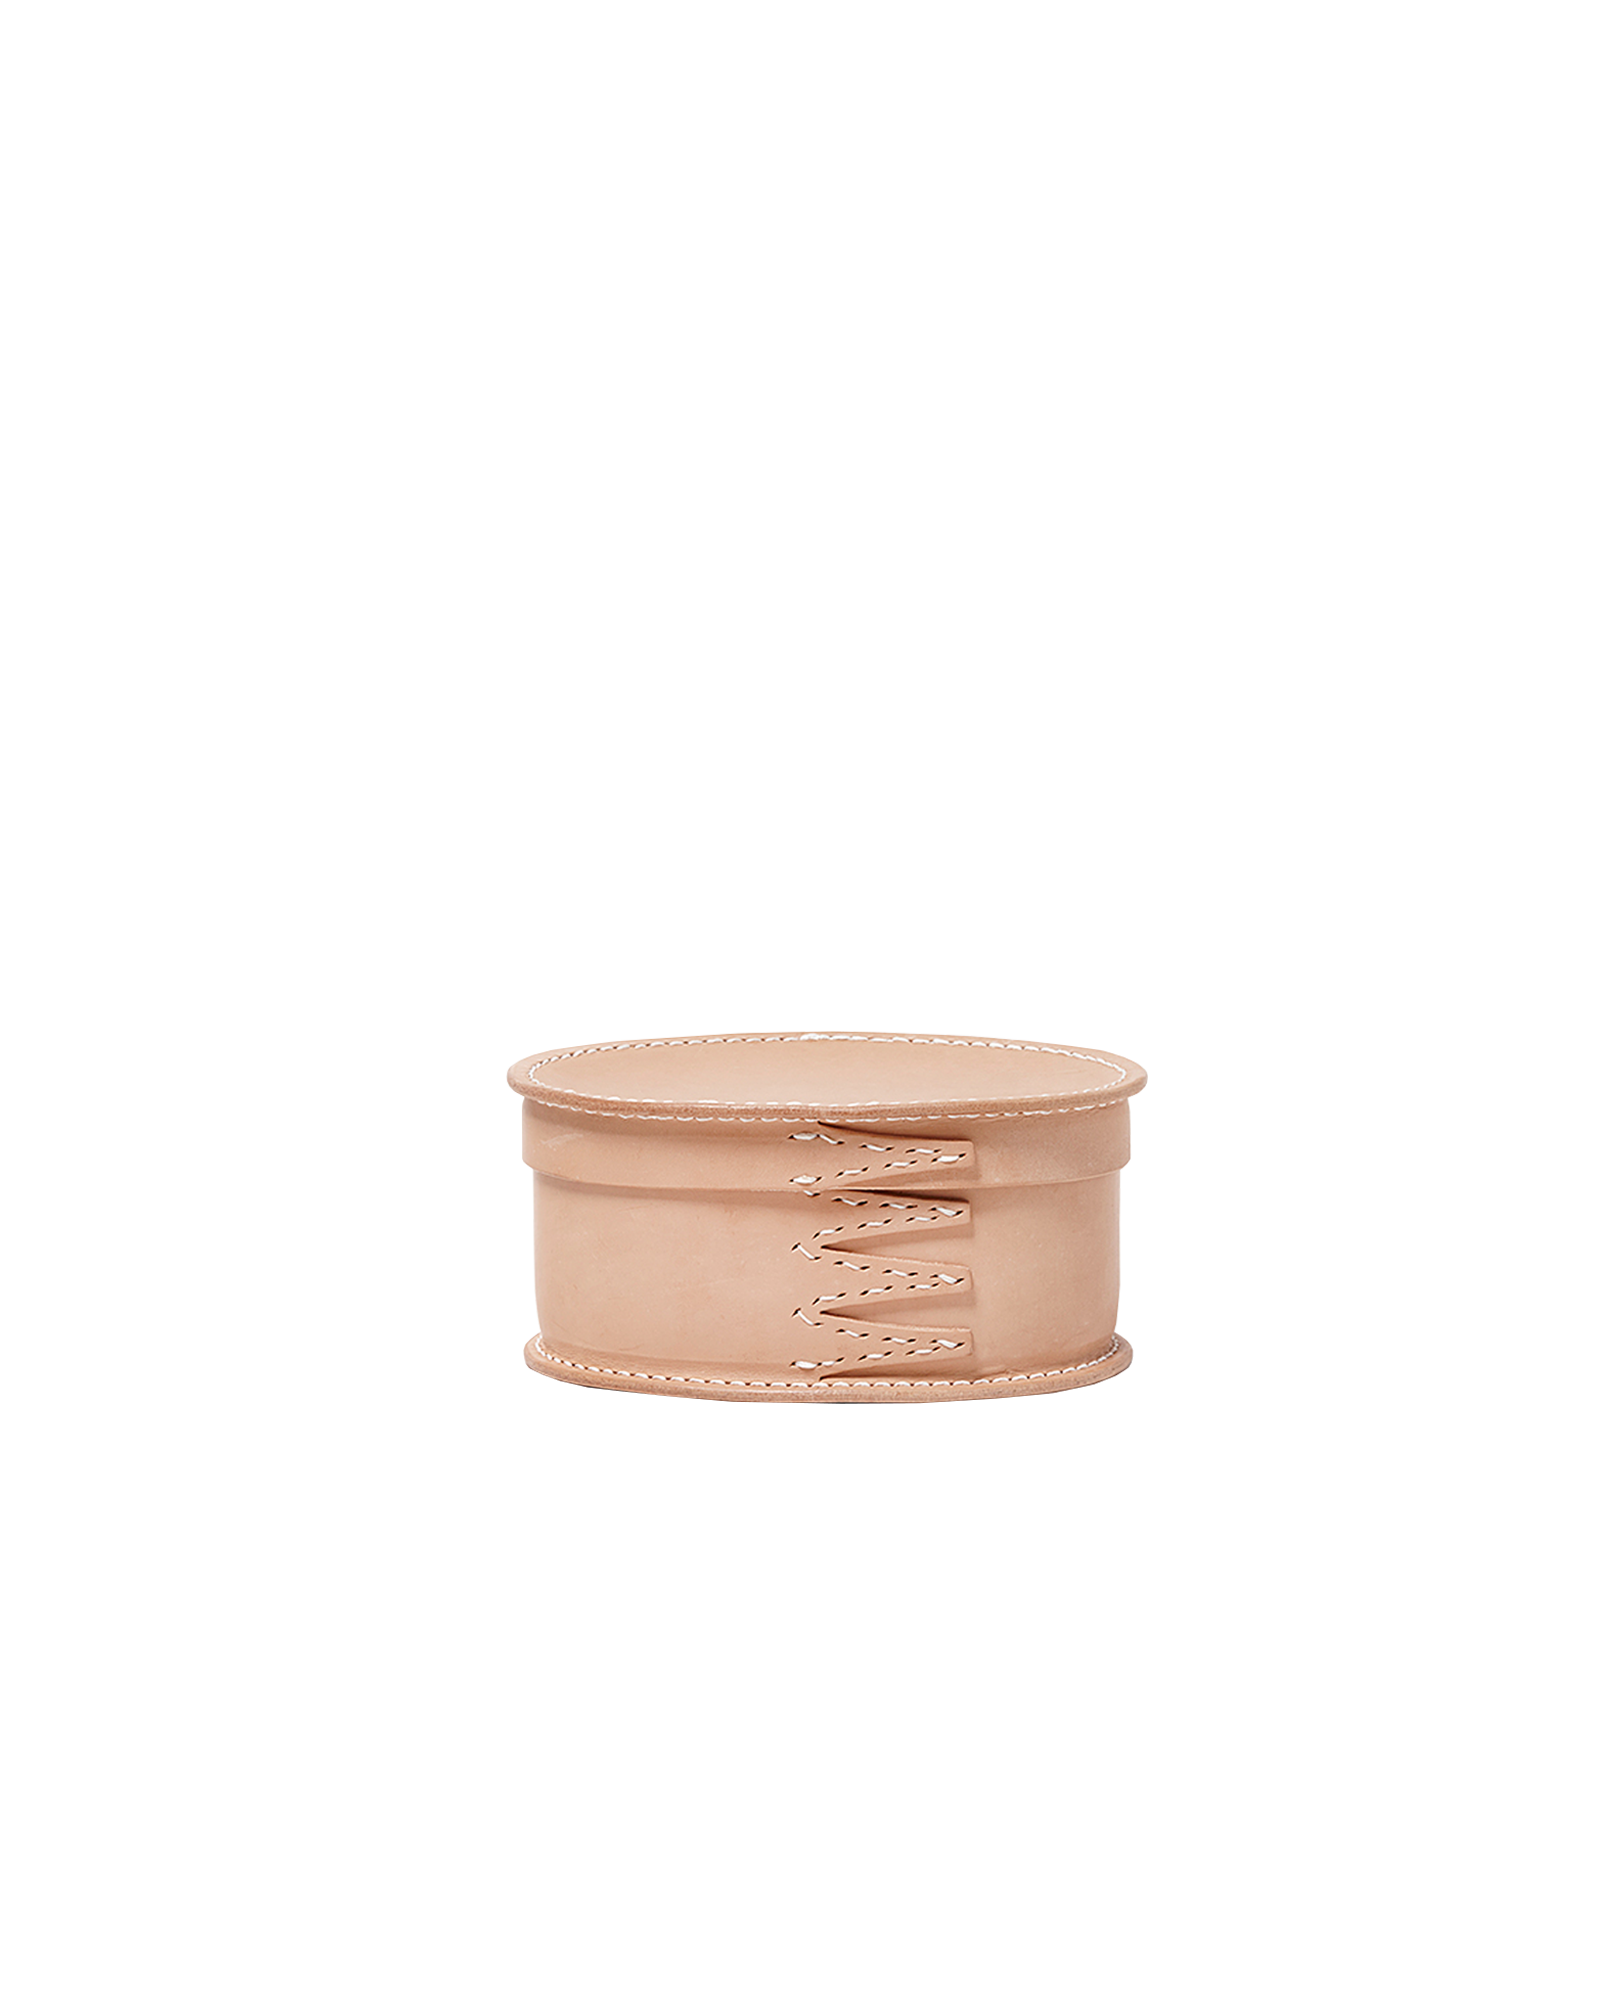 Shaker Oval Box S (Natural or Black)